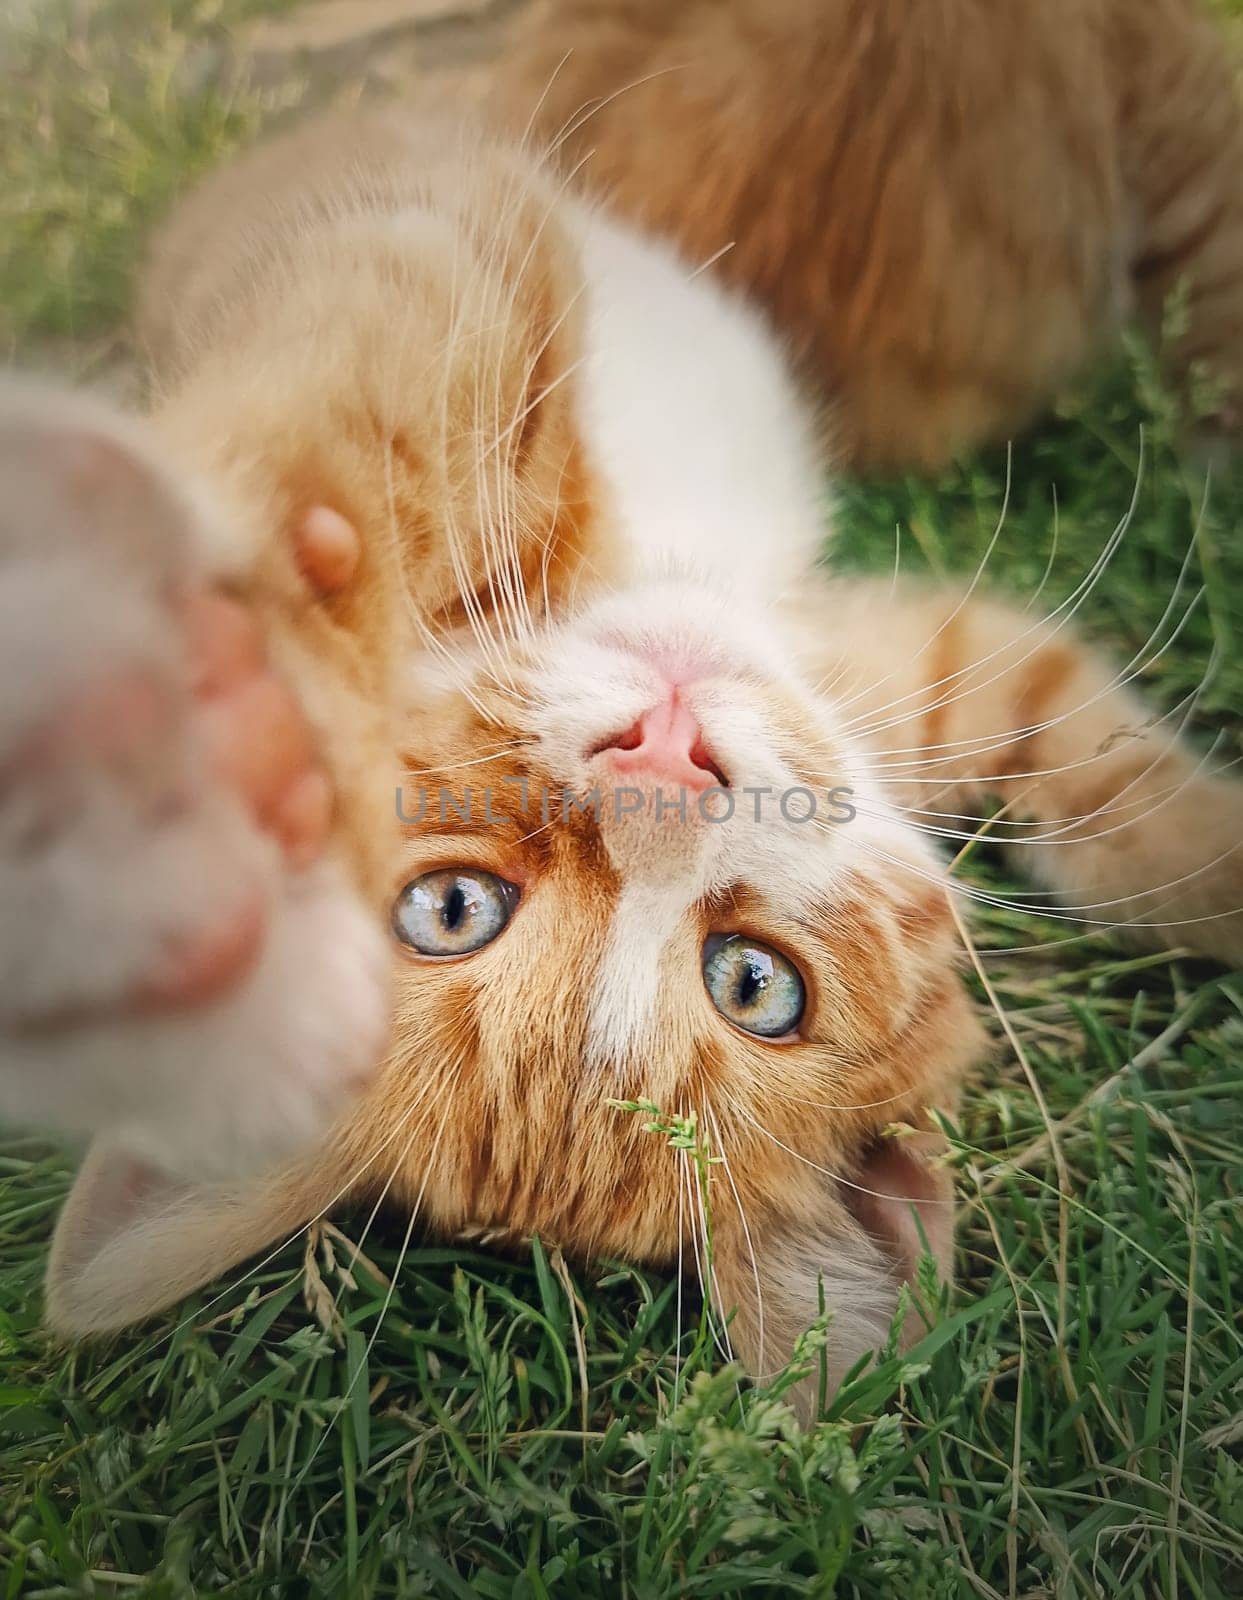 Playful orange kitten lying upside down on the green grass. Little ginger cat cute scene outdoors in the nature by psychoshadow